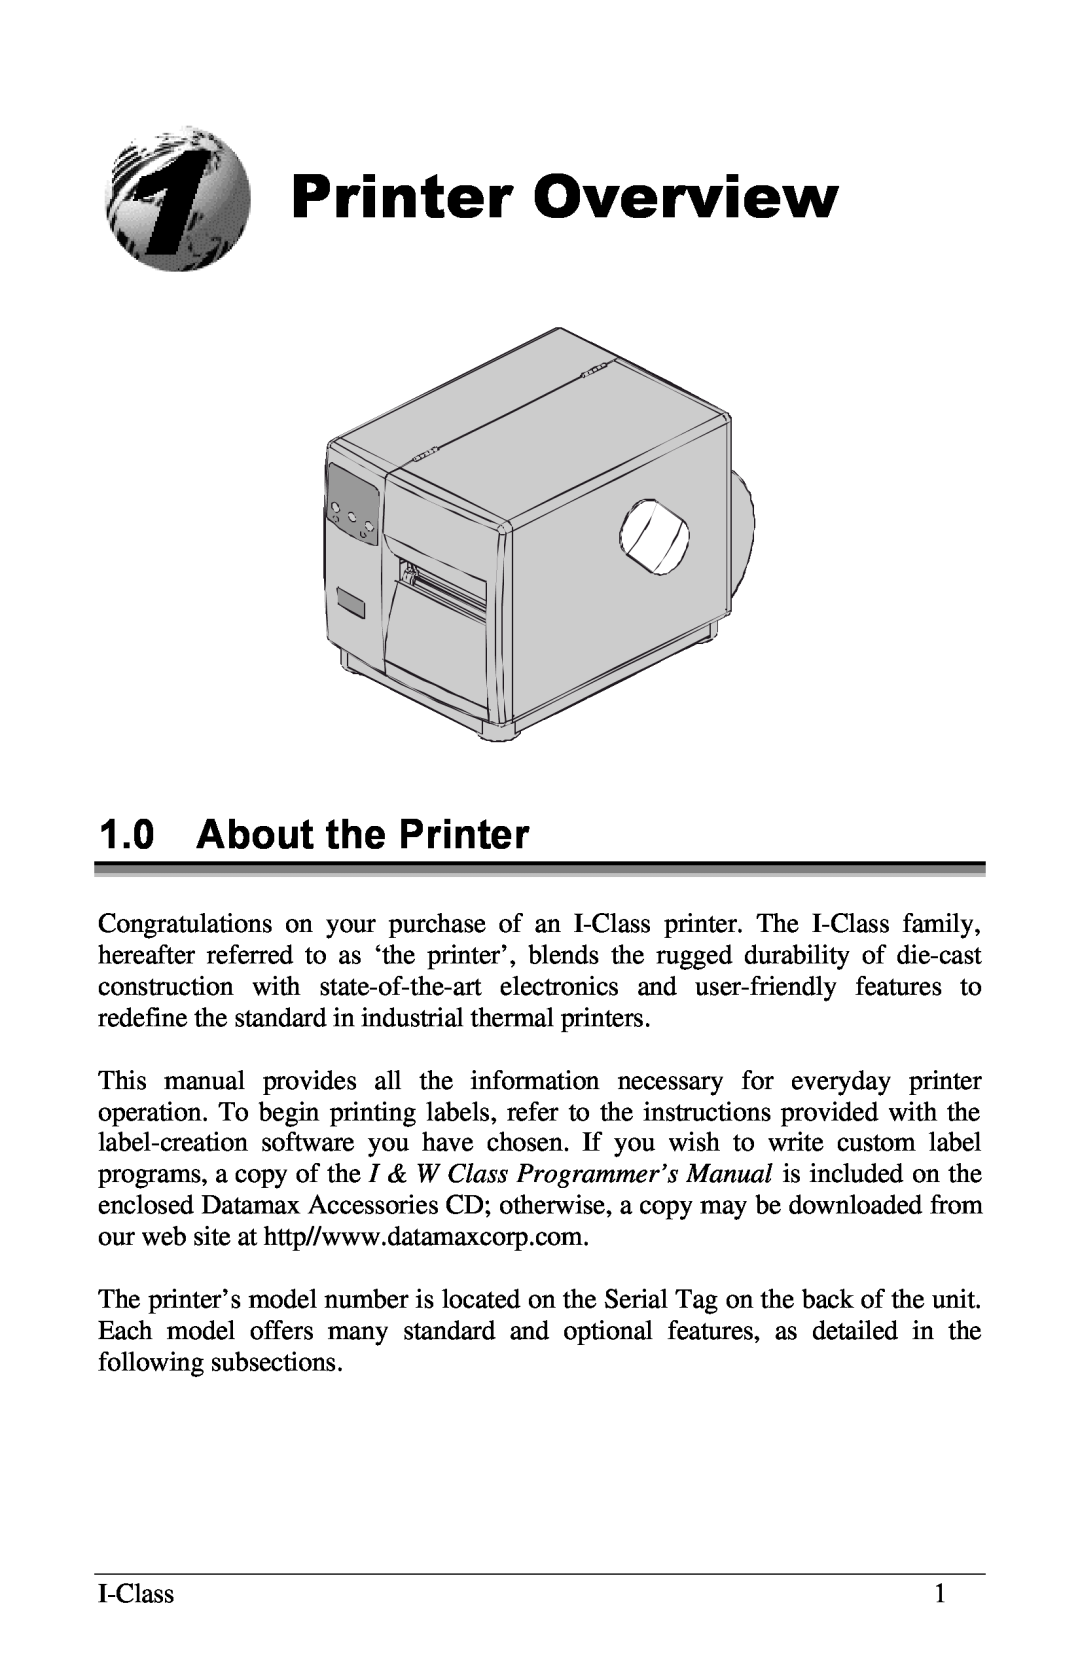 Xerox I Class manual Printer Overview, 1.0About the Printer 